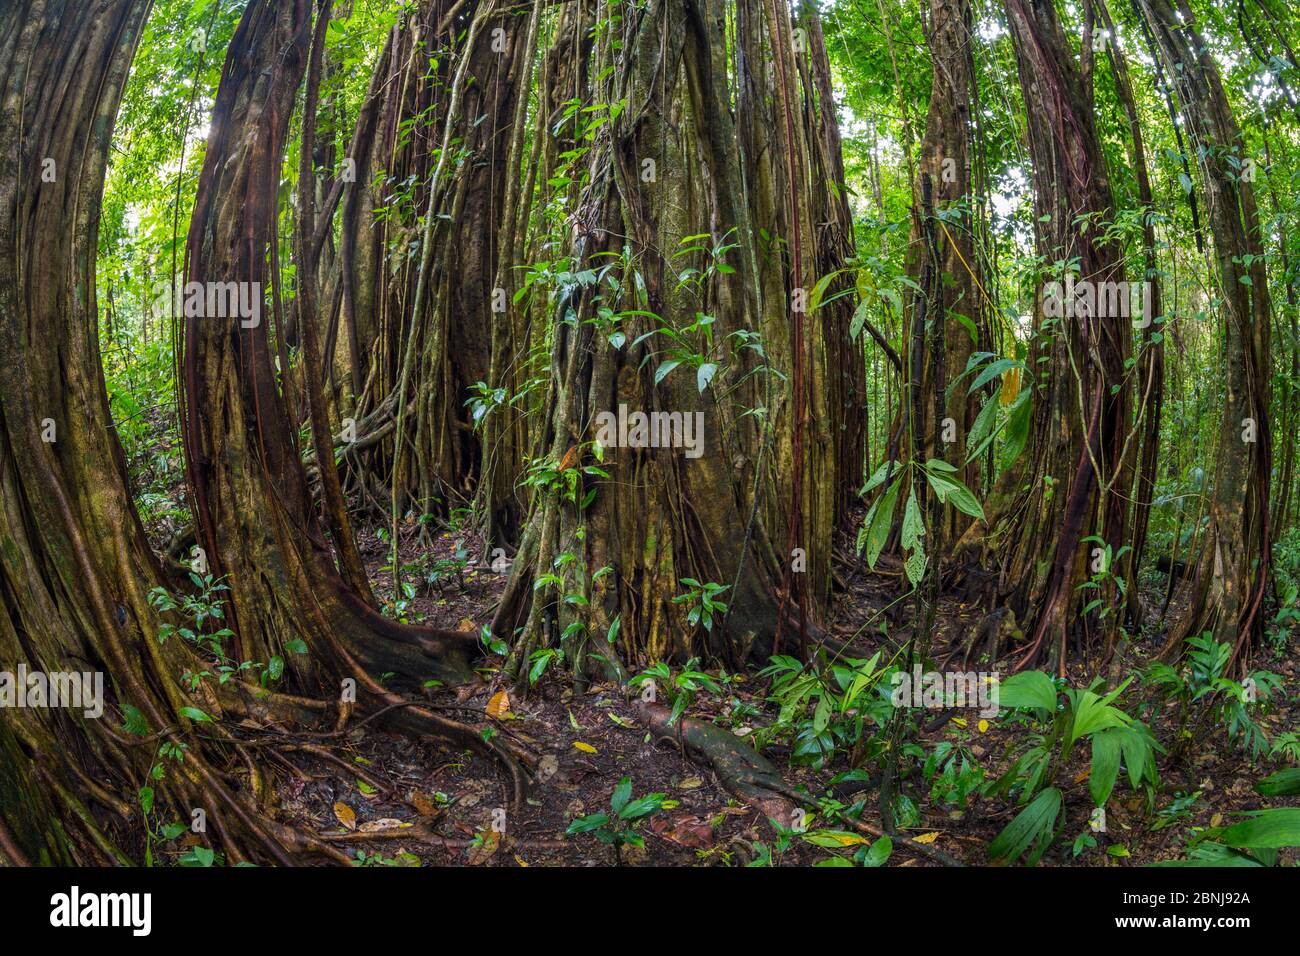 Strangler fig (Ficus zarazalensis) a species endemic to the Osa Peninsula, growing in lowland rainforest, Osa Peninsula, Costa Rica Stock Photo